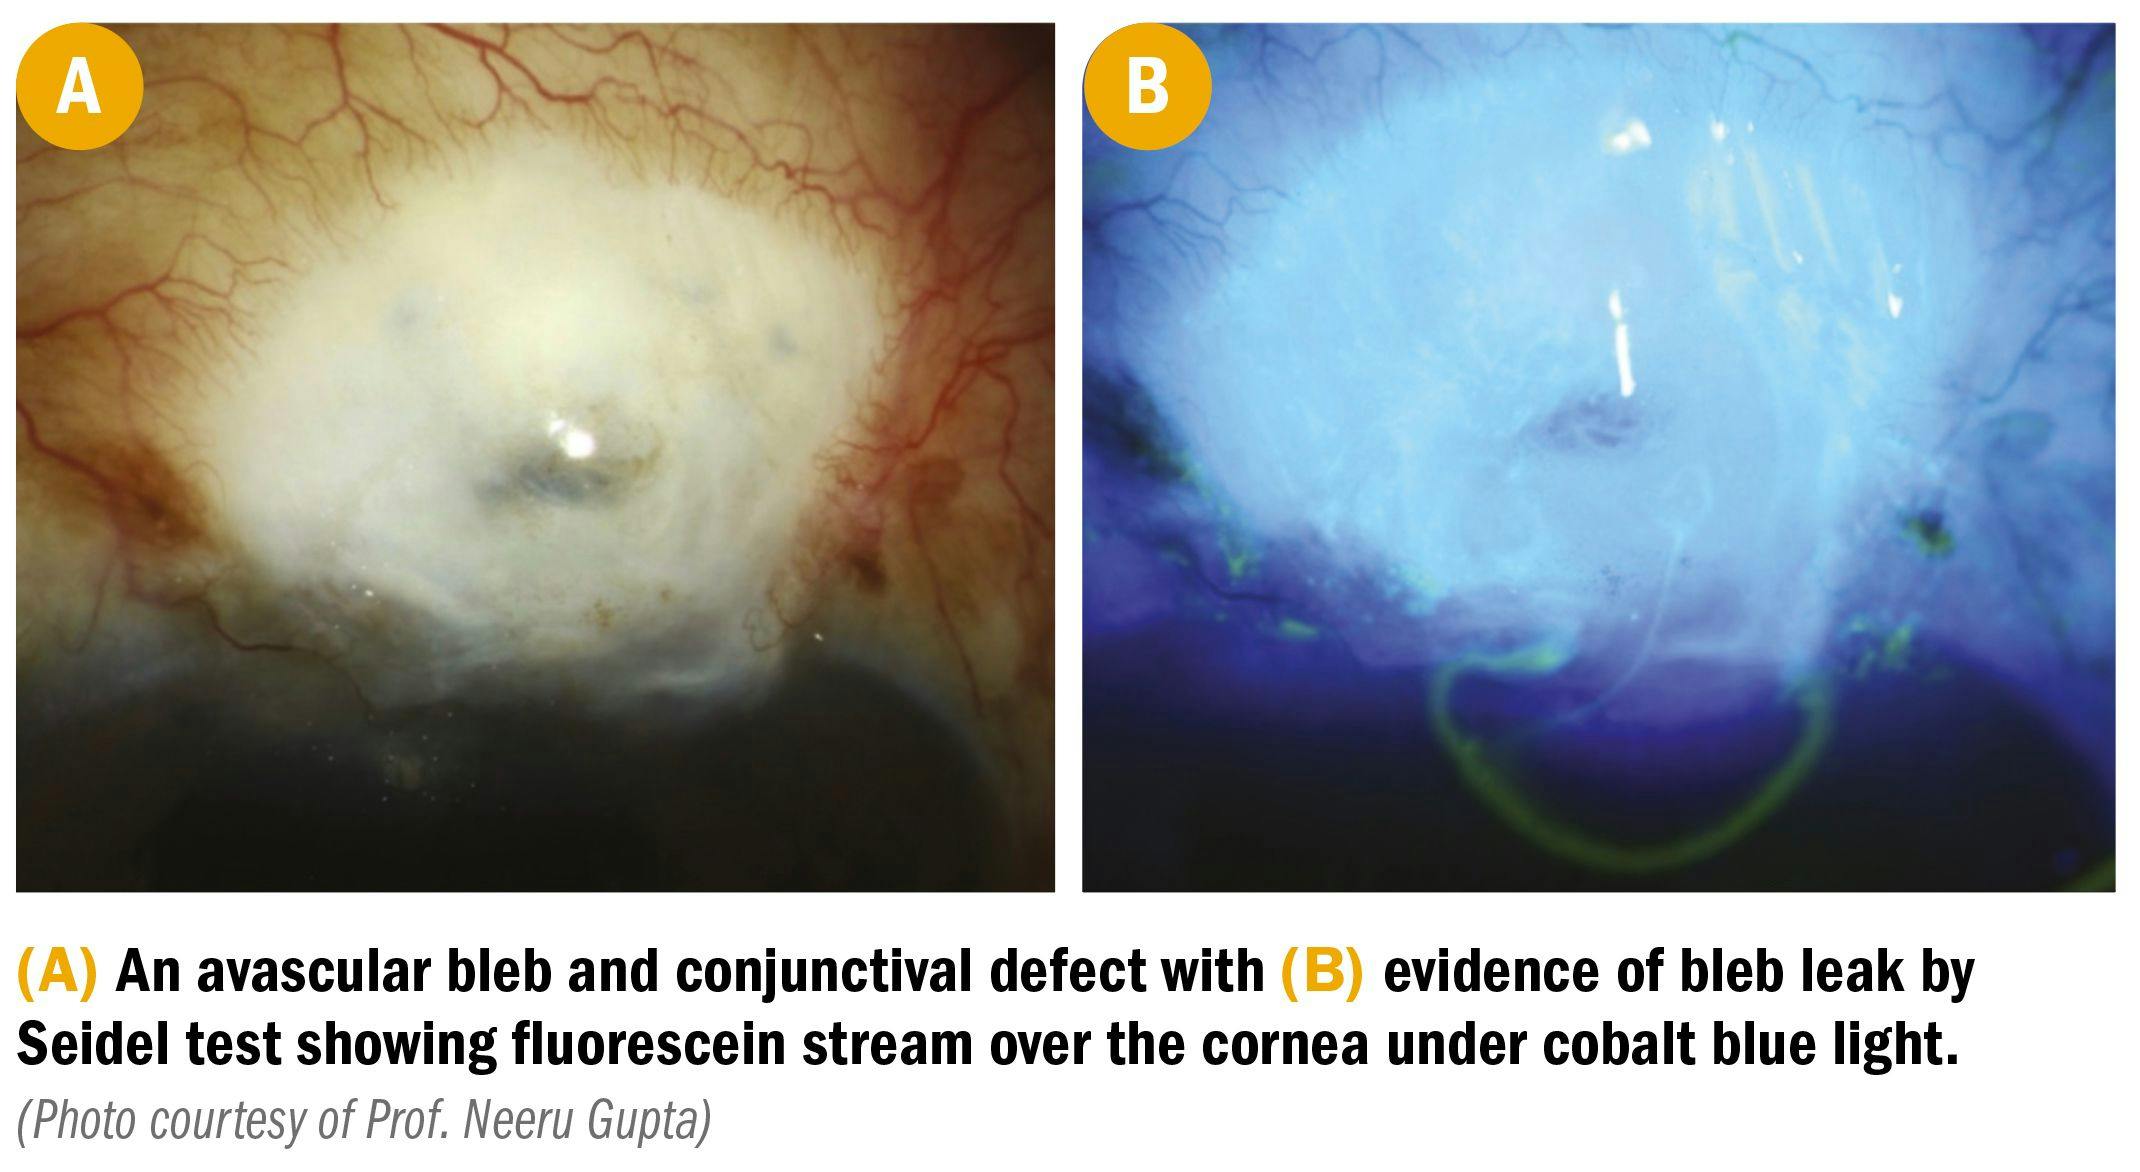 scans of avascular bleb and conjunctival defect of eye